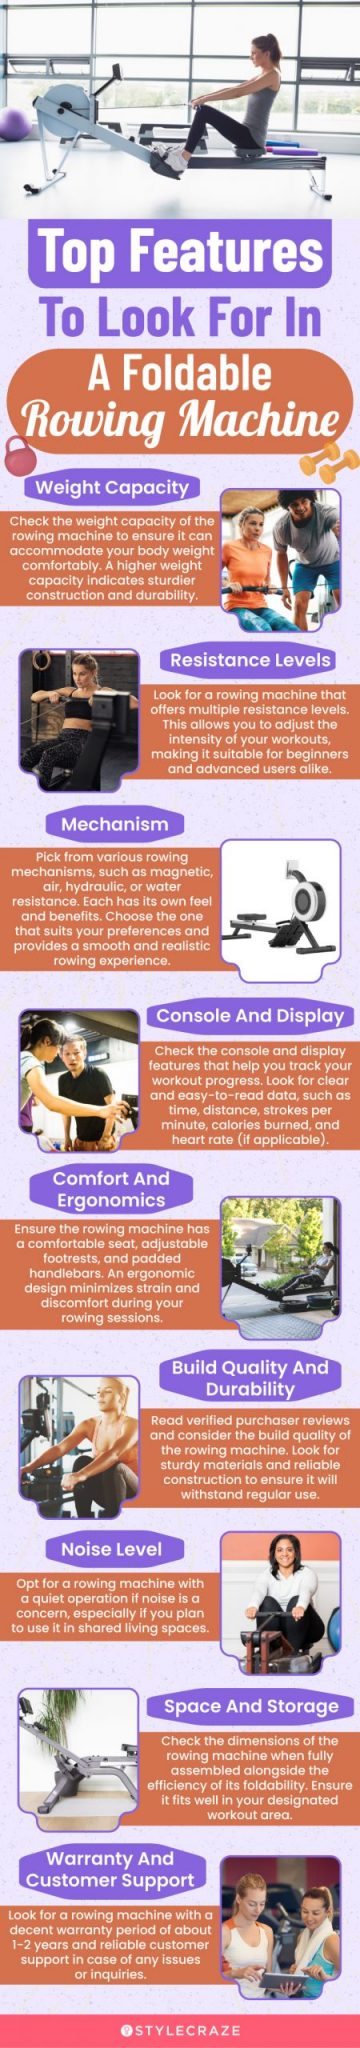 Top Features To Look For In A Foldable Rowing Machine (infographic)